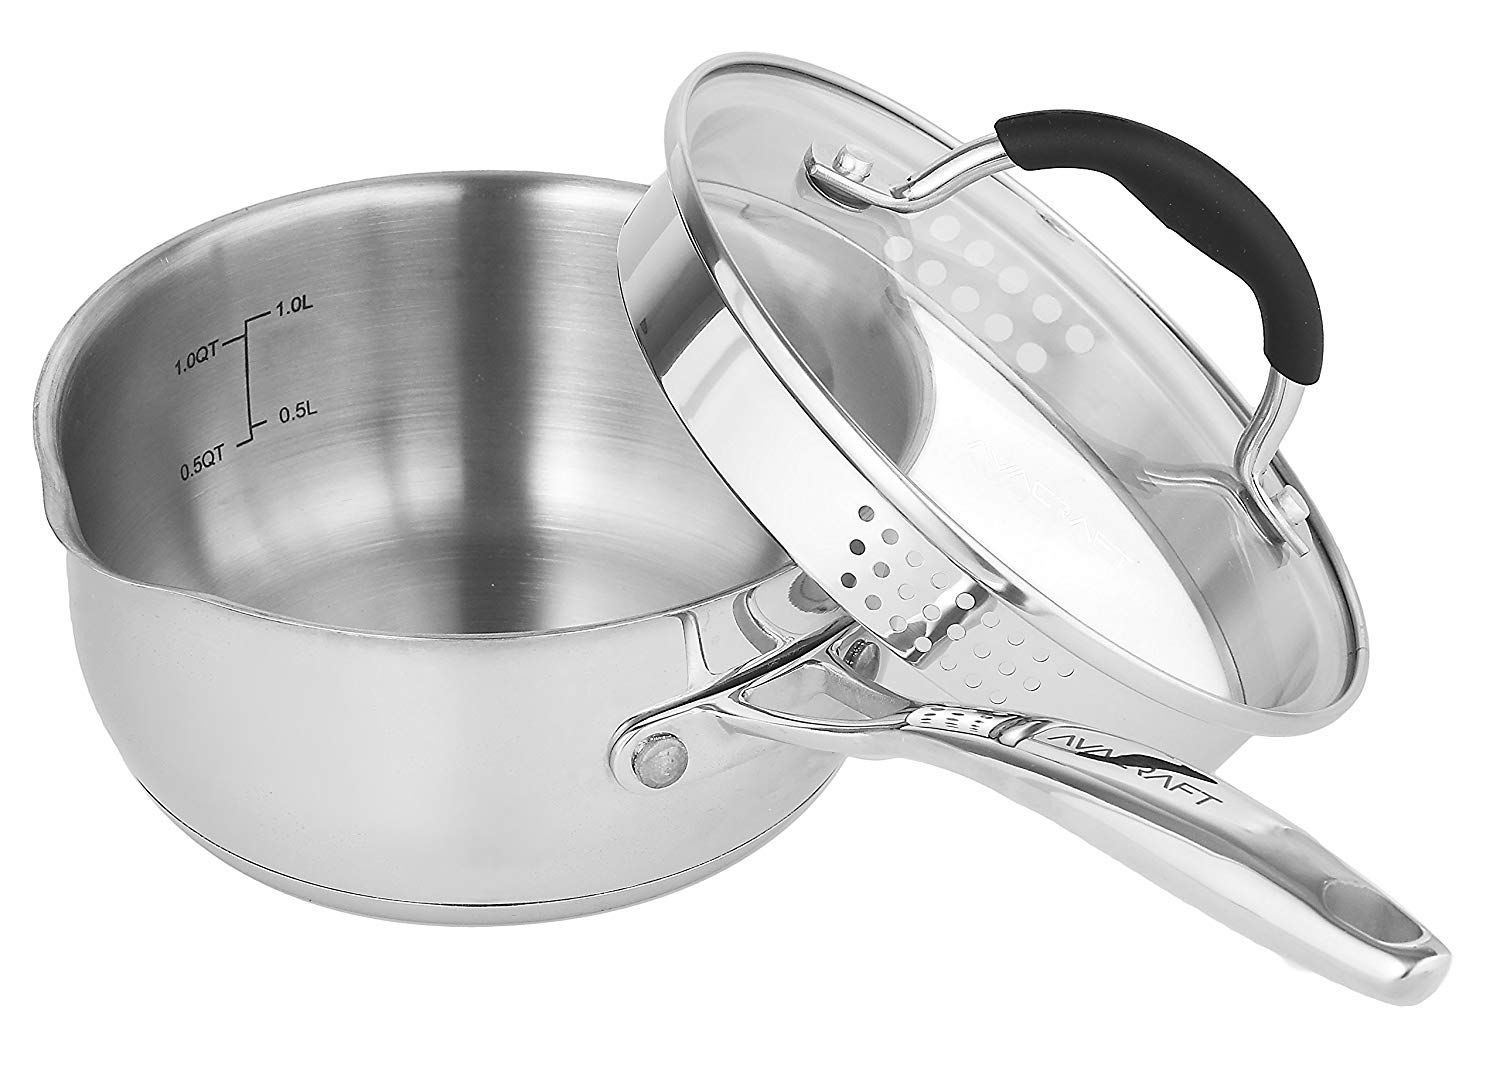 AVACRAFT Stainless Steel Saucepan with Glass Lid, Strainer Lid, Two Side Spouts for Easy Pour with Ergonomic Handle, Multipurpose Sauce Pan with Lid, Sauce Pot (Tri-Ply Capsule Bottom, 1.5 Quart)